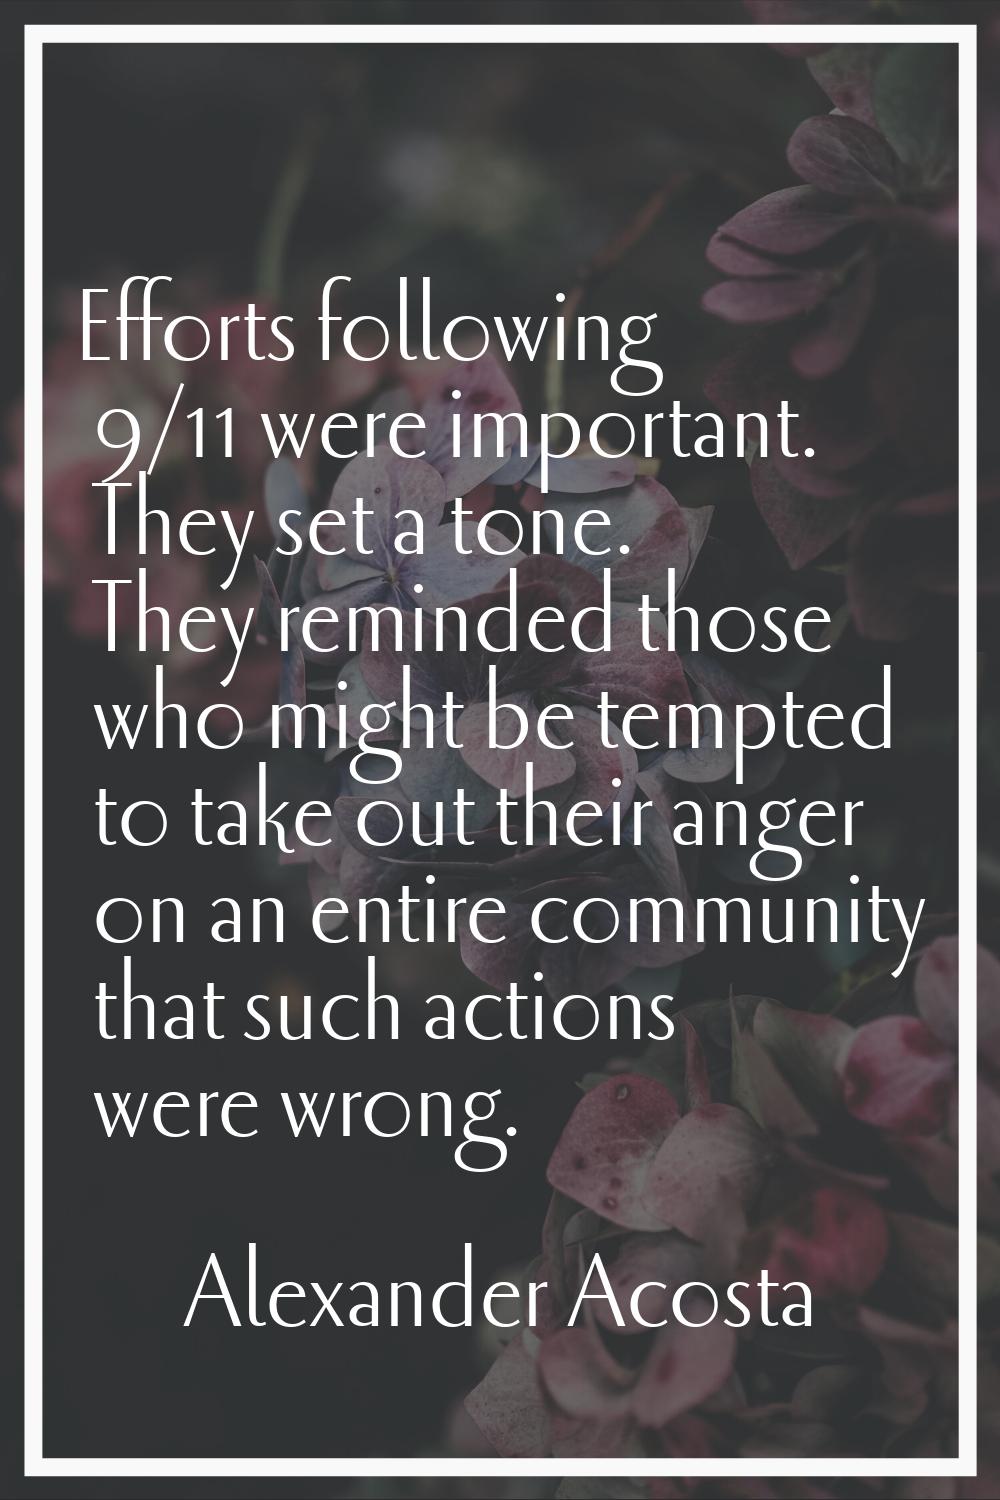 Efforts following 9/11 were important. They set a tone. They reminded those who might be tempted to